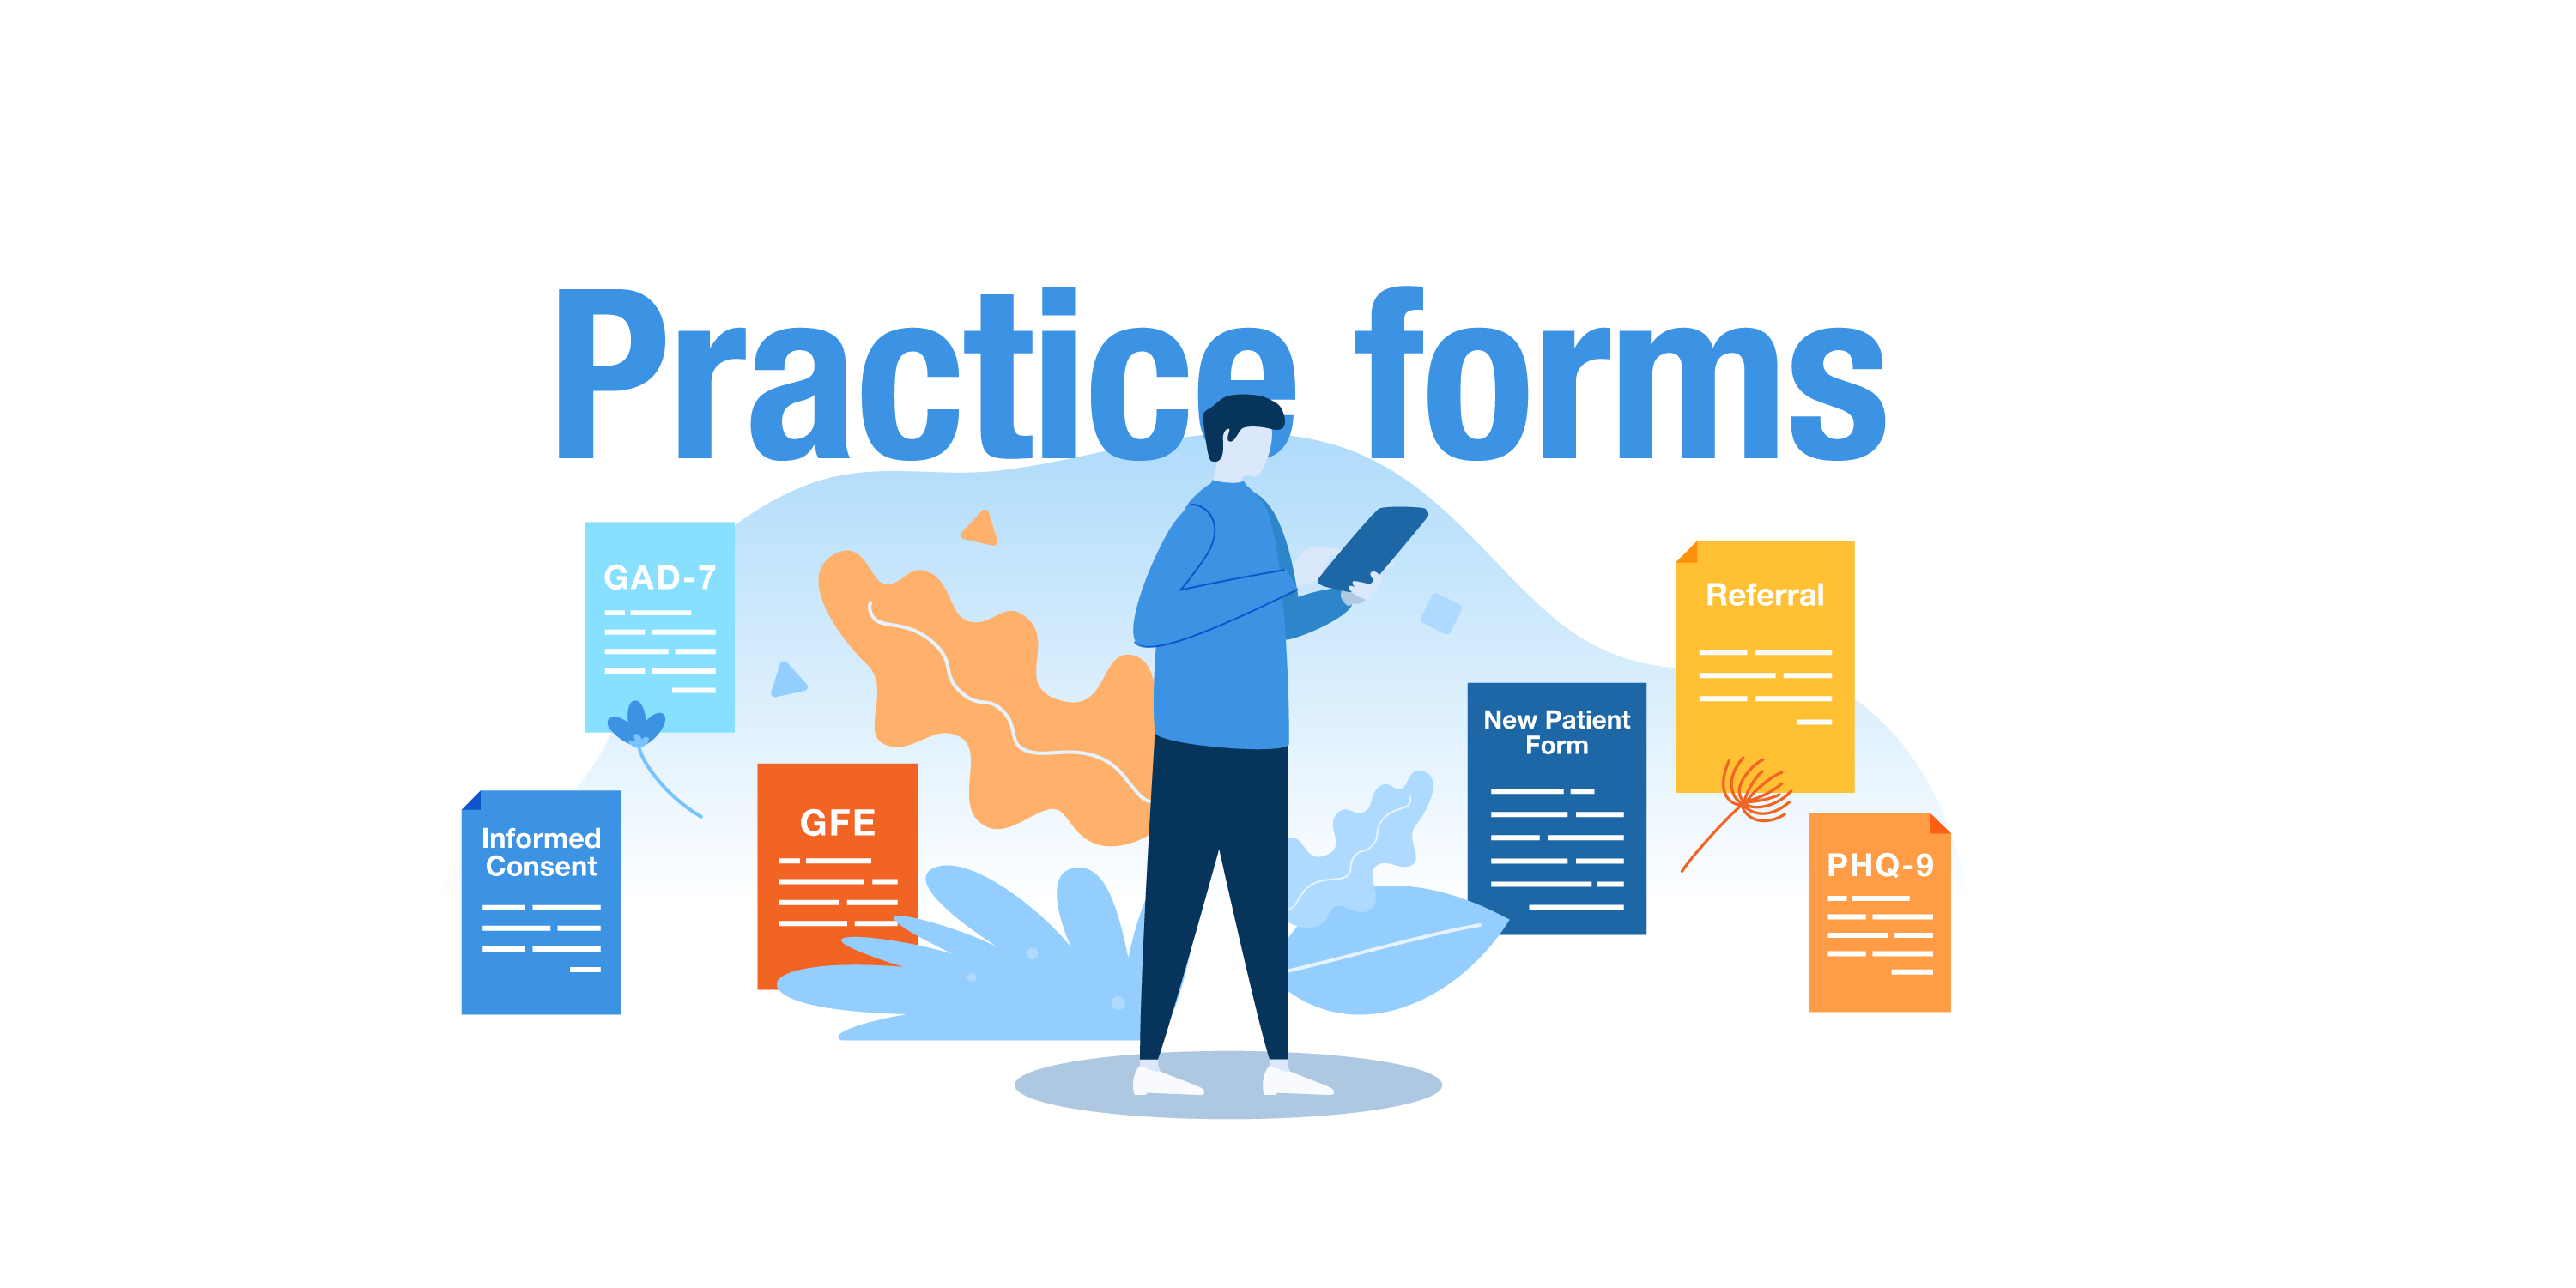 01_Featured Image_Are Google Forms HIPAA compliant